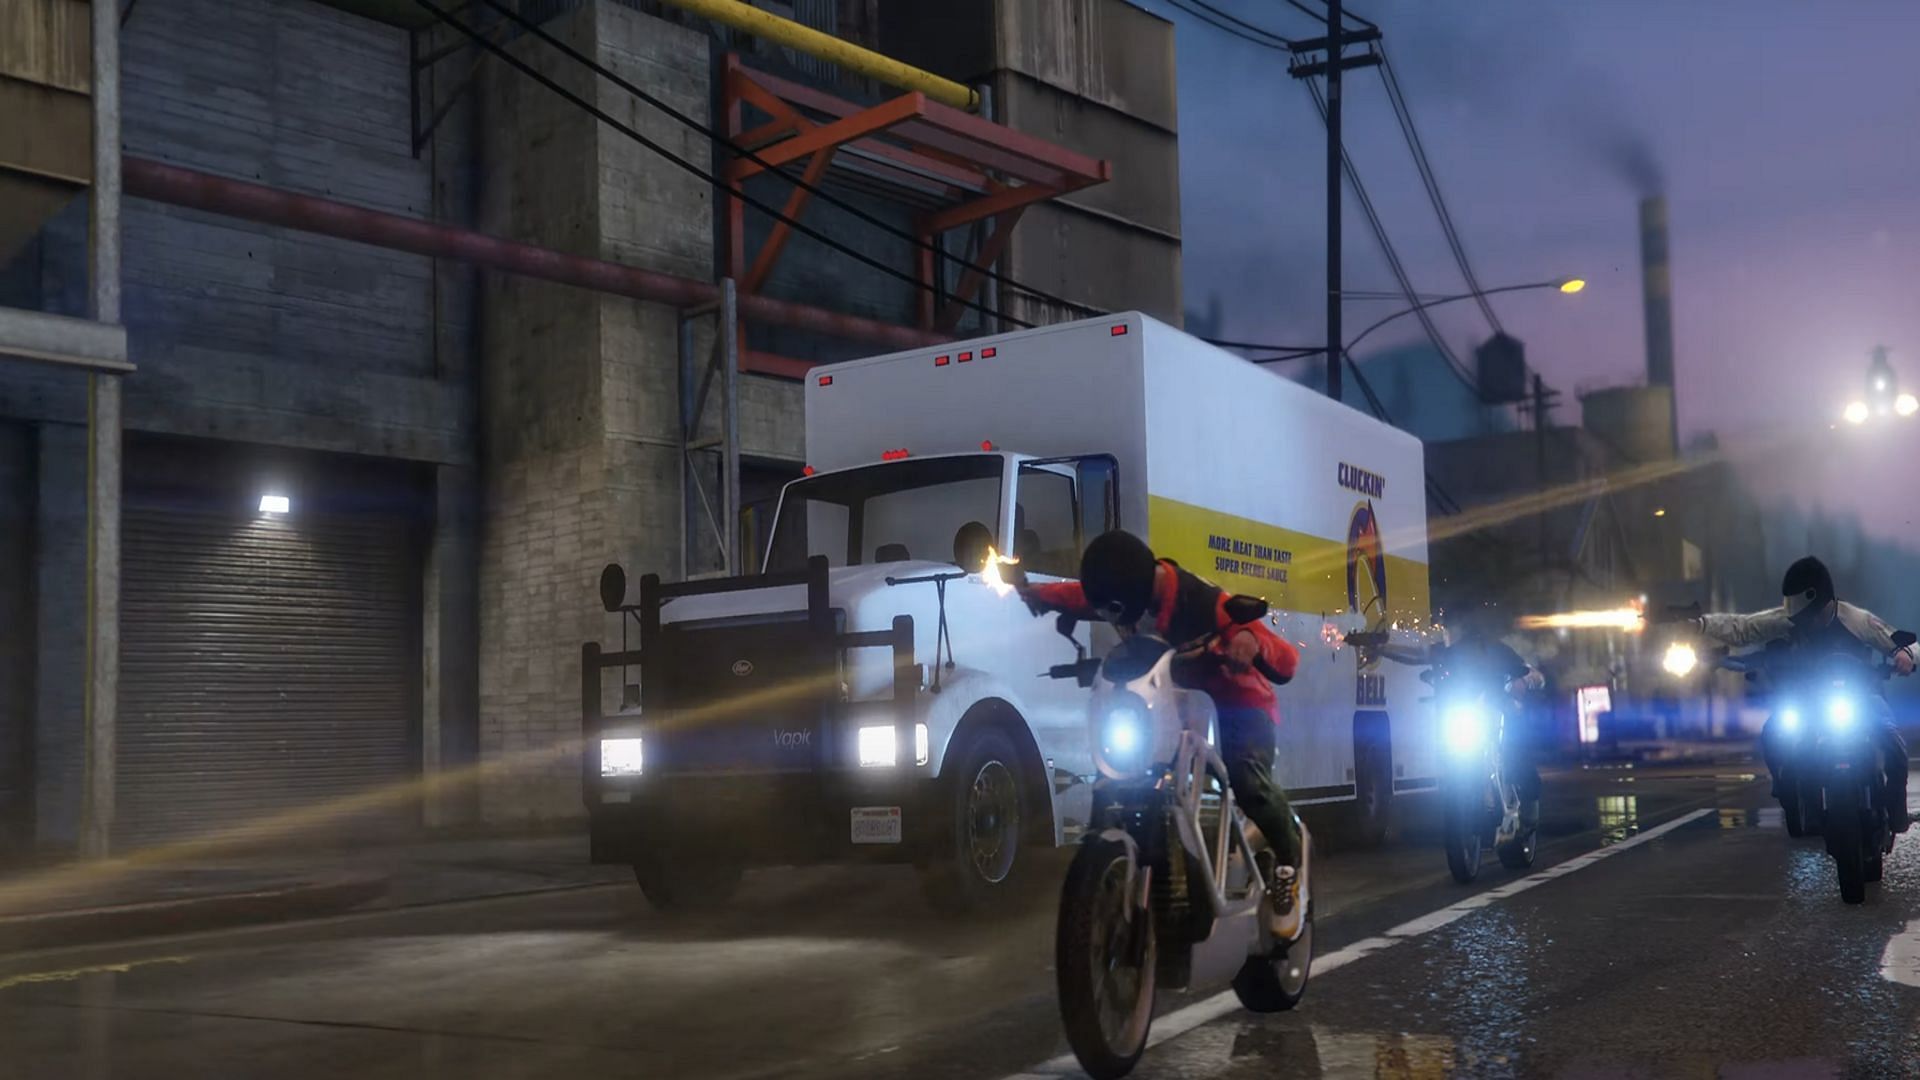 The new truck that might appear in the game (Image via Rockstar Games)